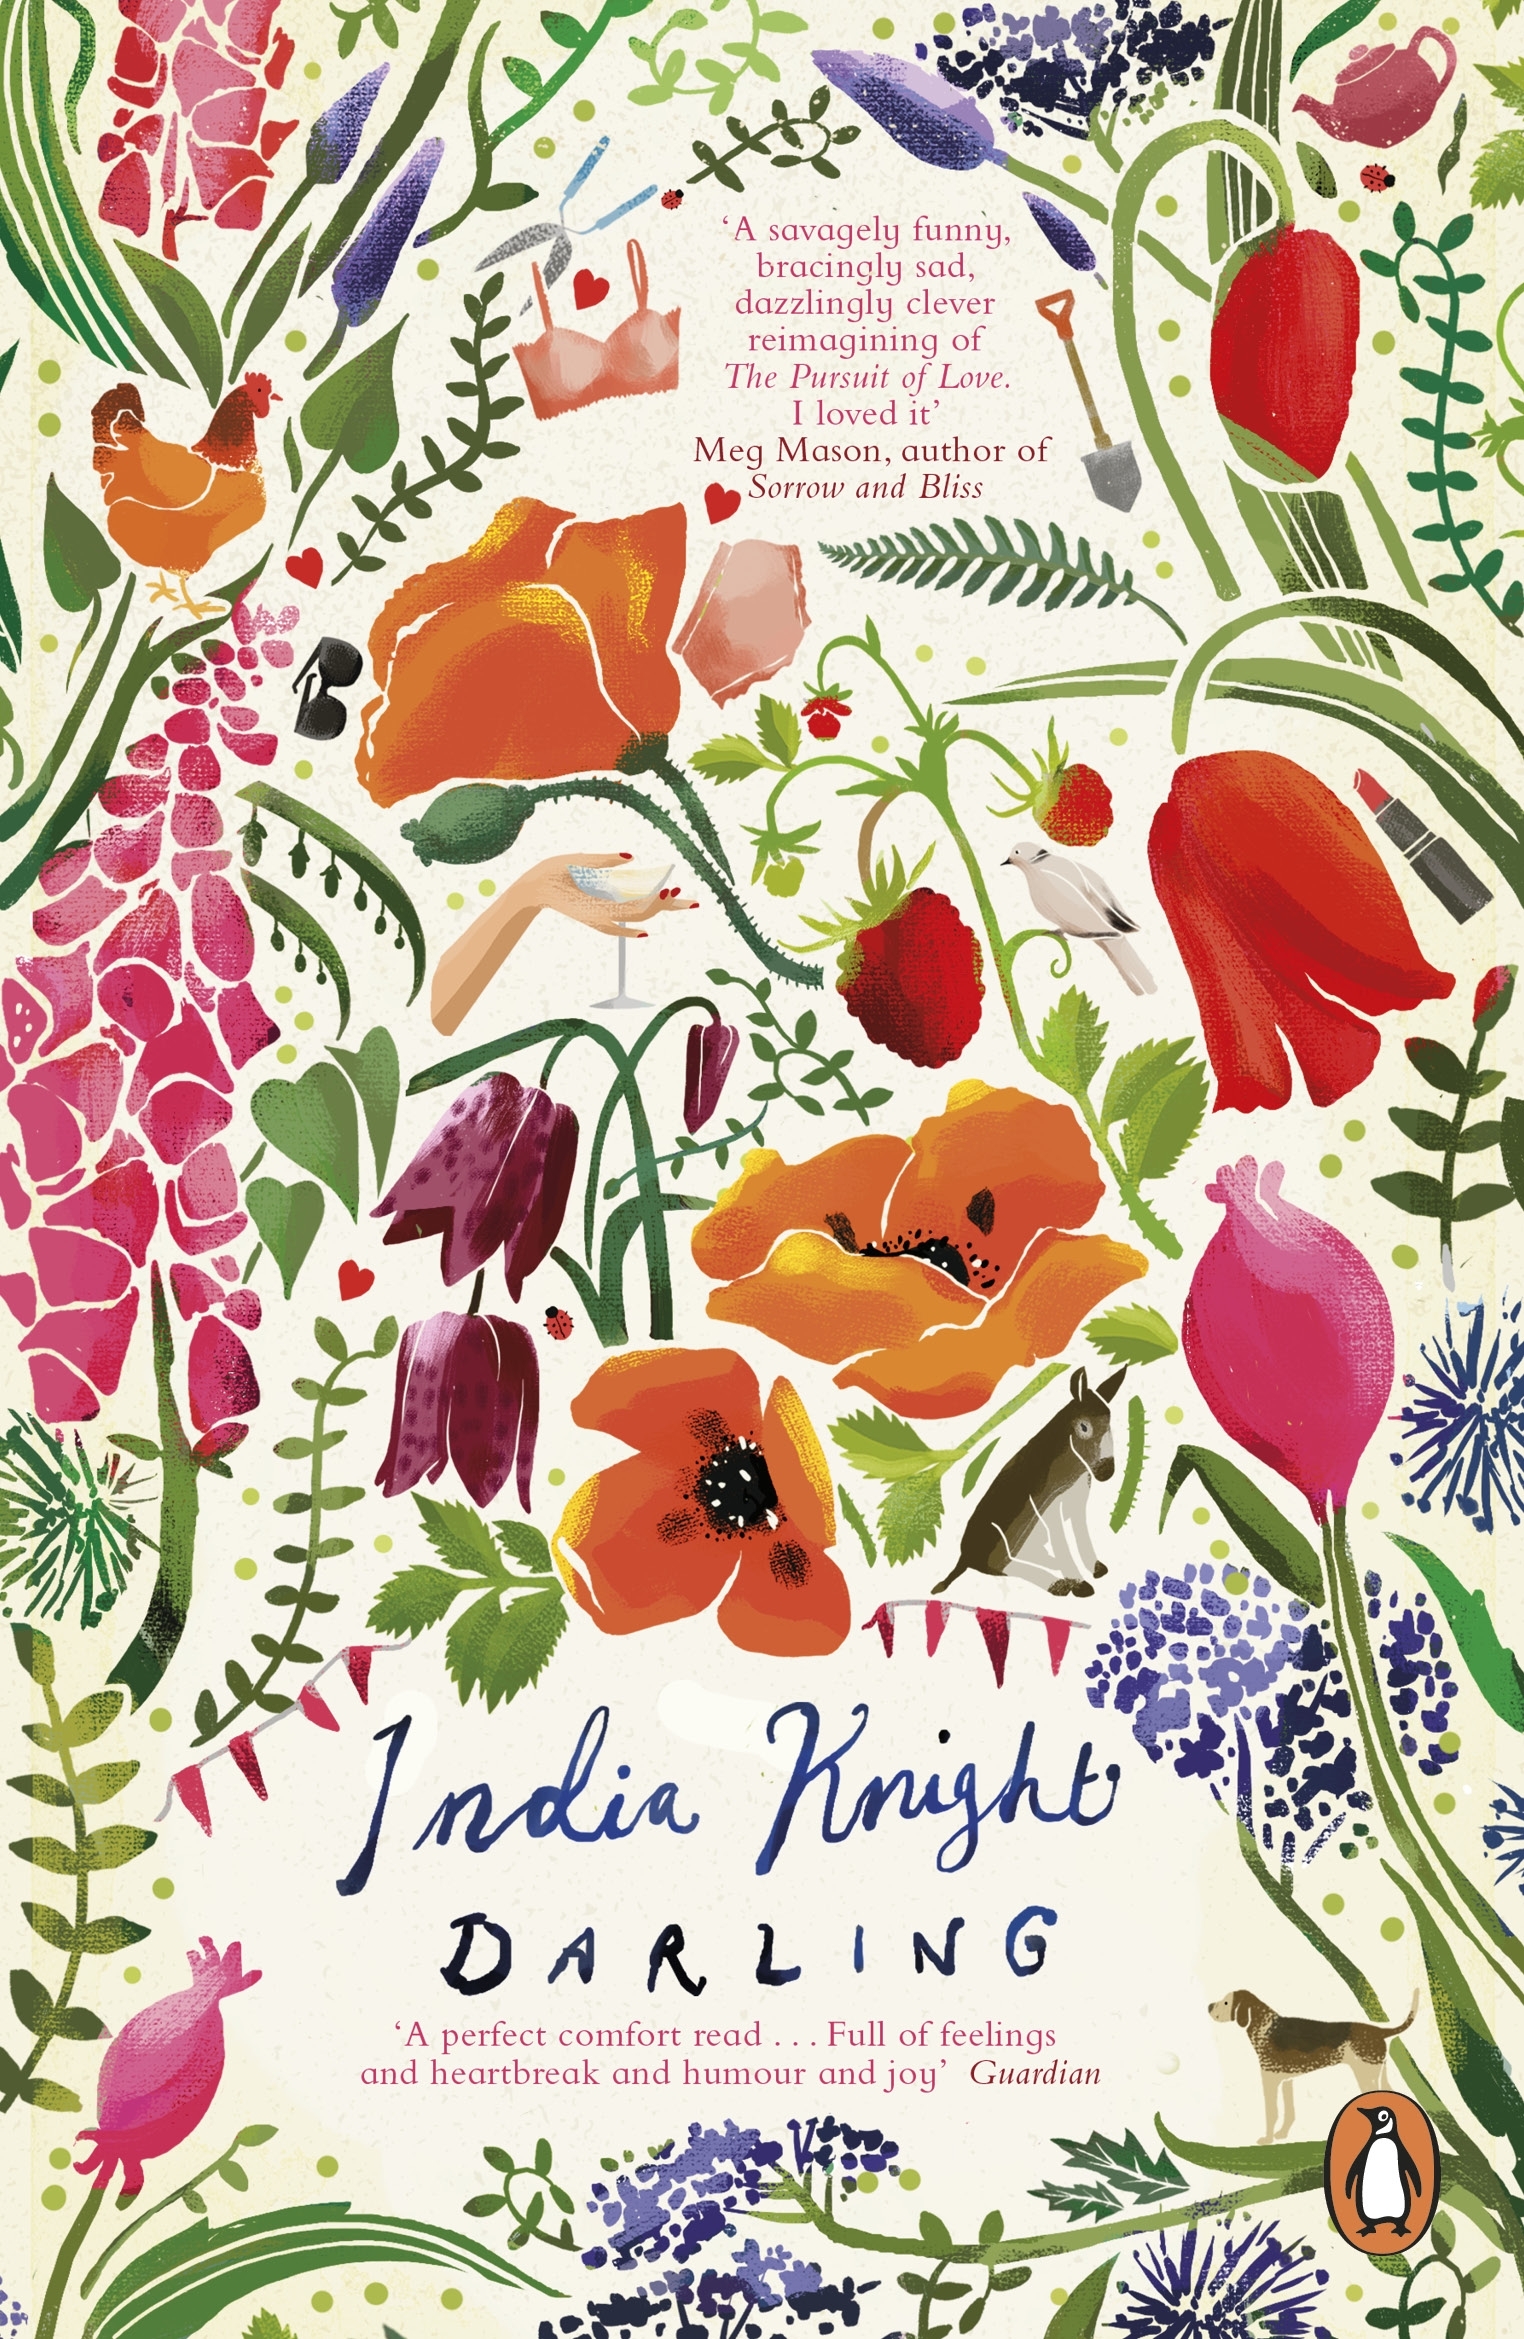 Darling by India Knight - Penguin Books New Zealand